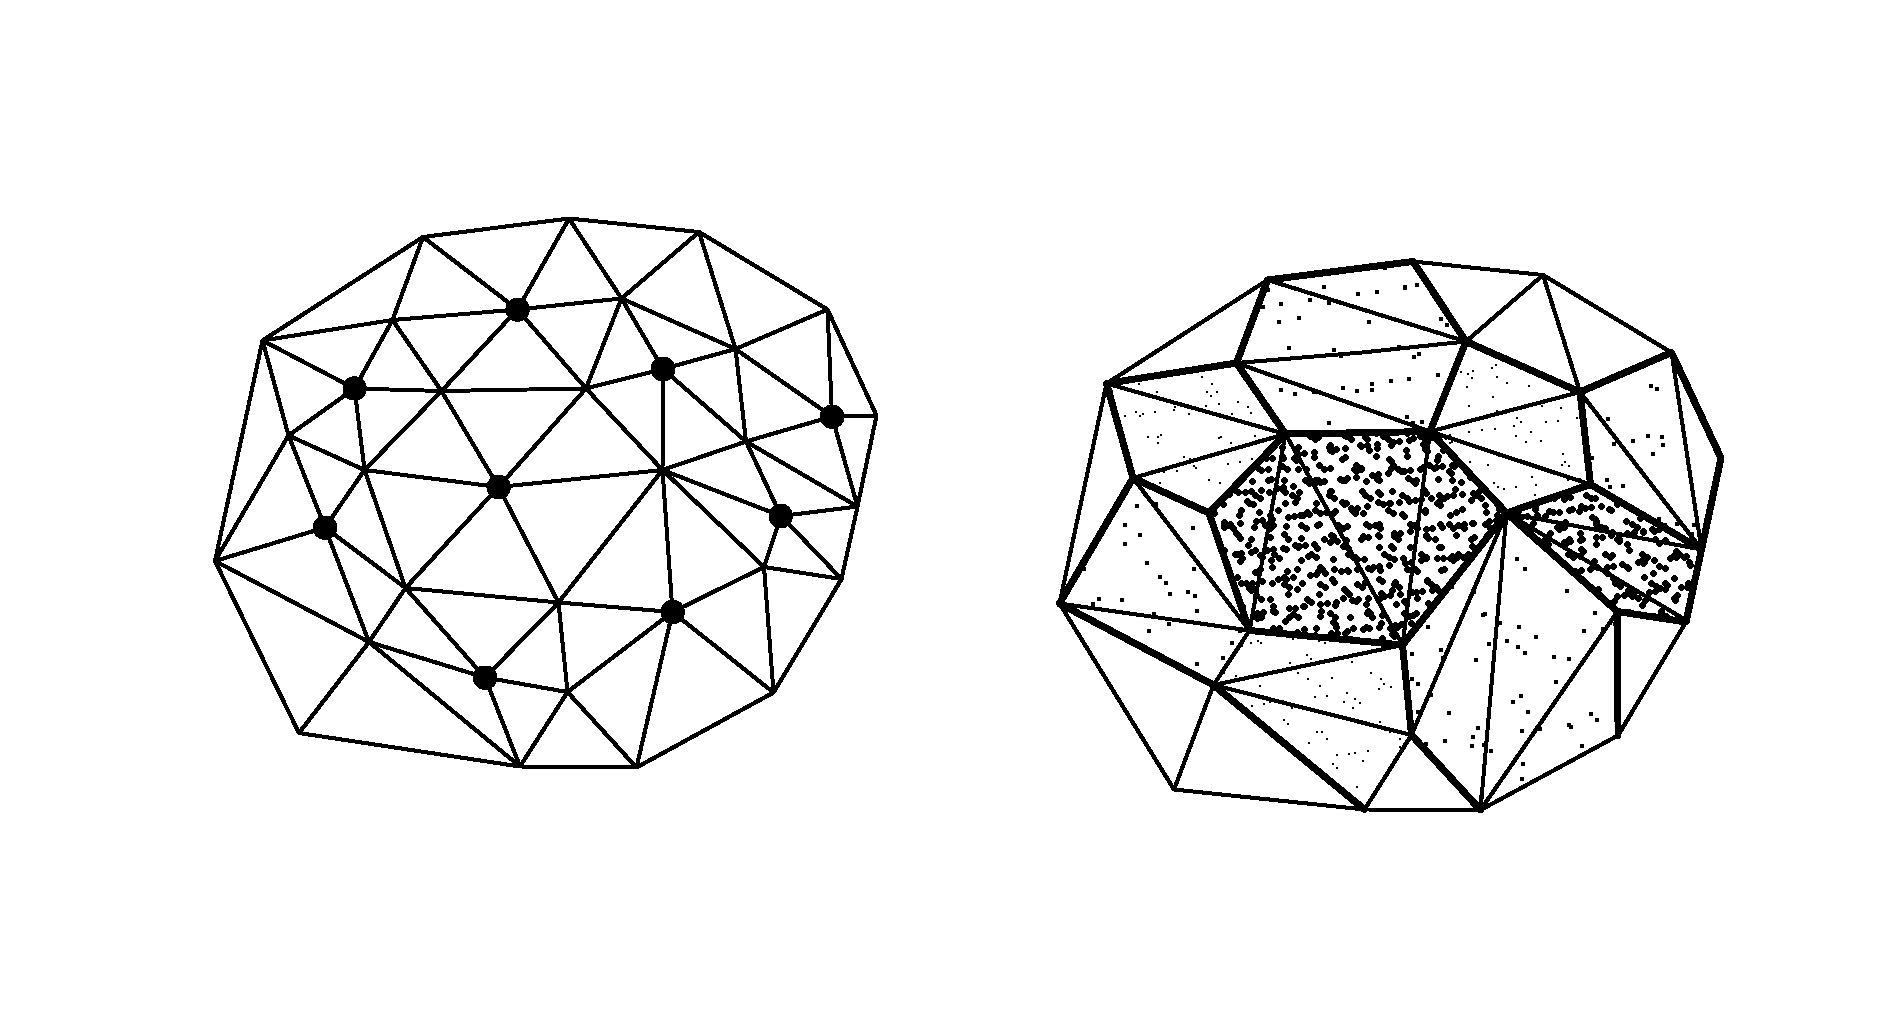 Method for compressing/decompressing a three-dimensional mesh